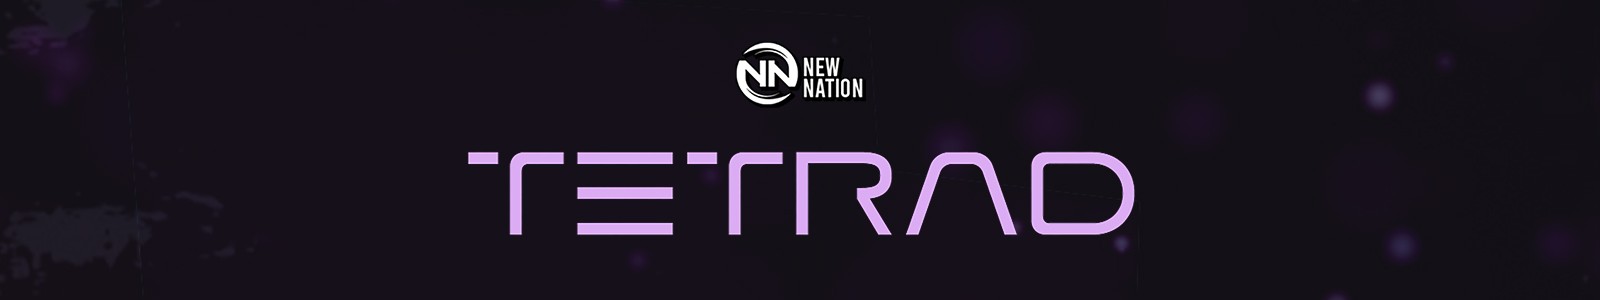 Tetrad by New Nation